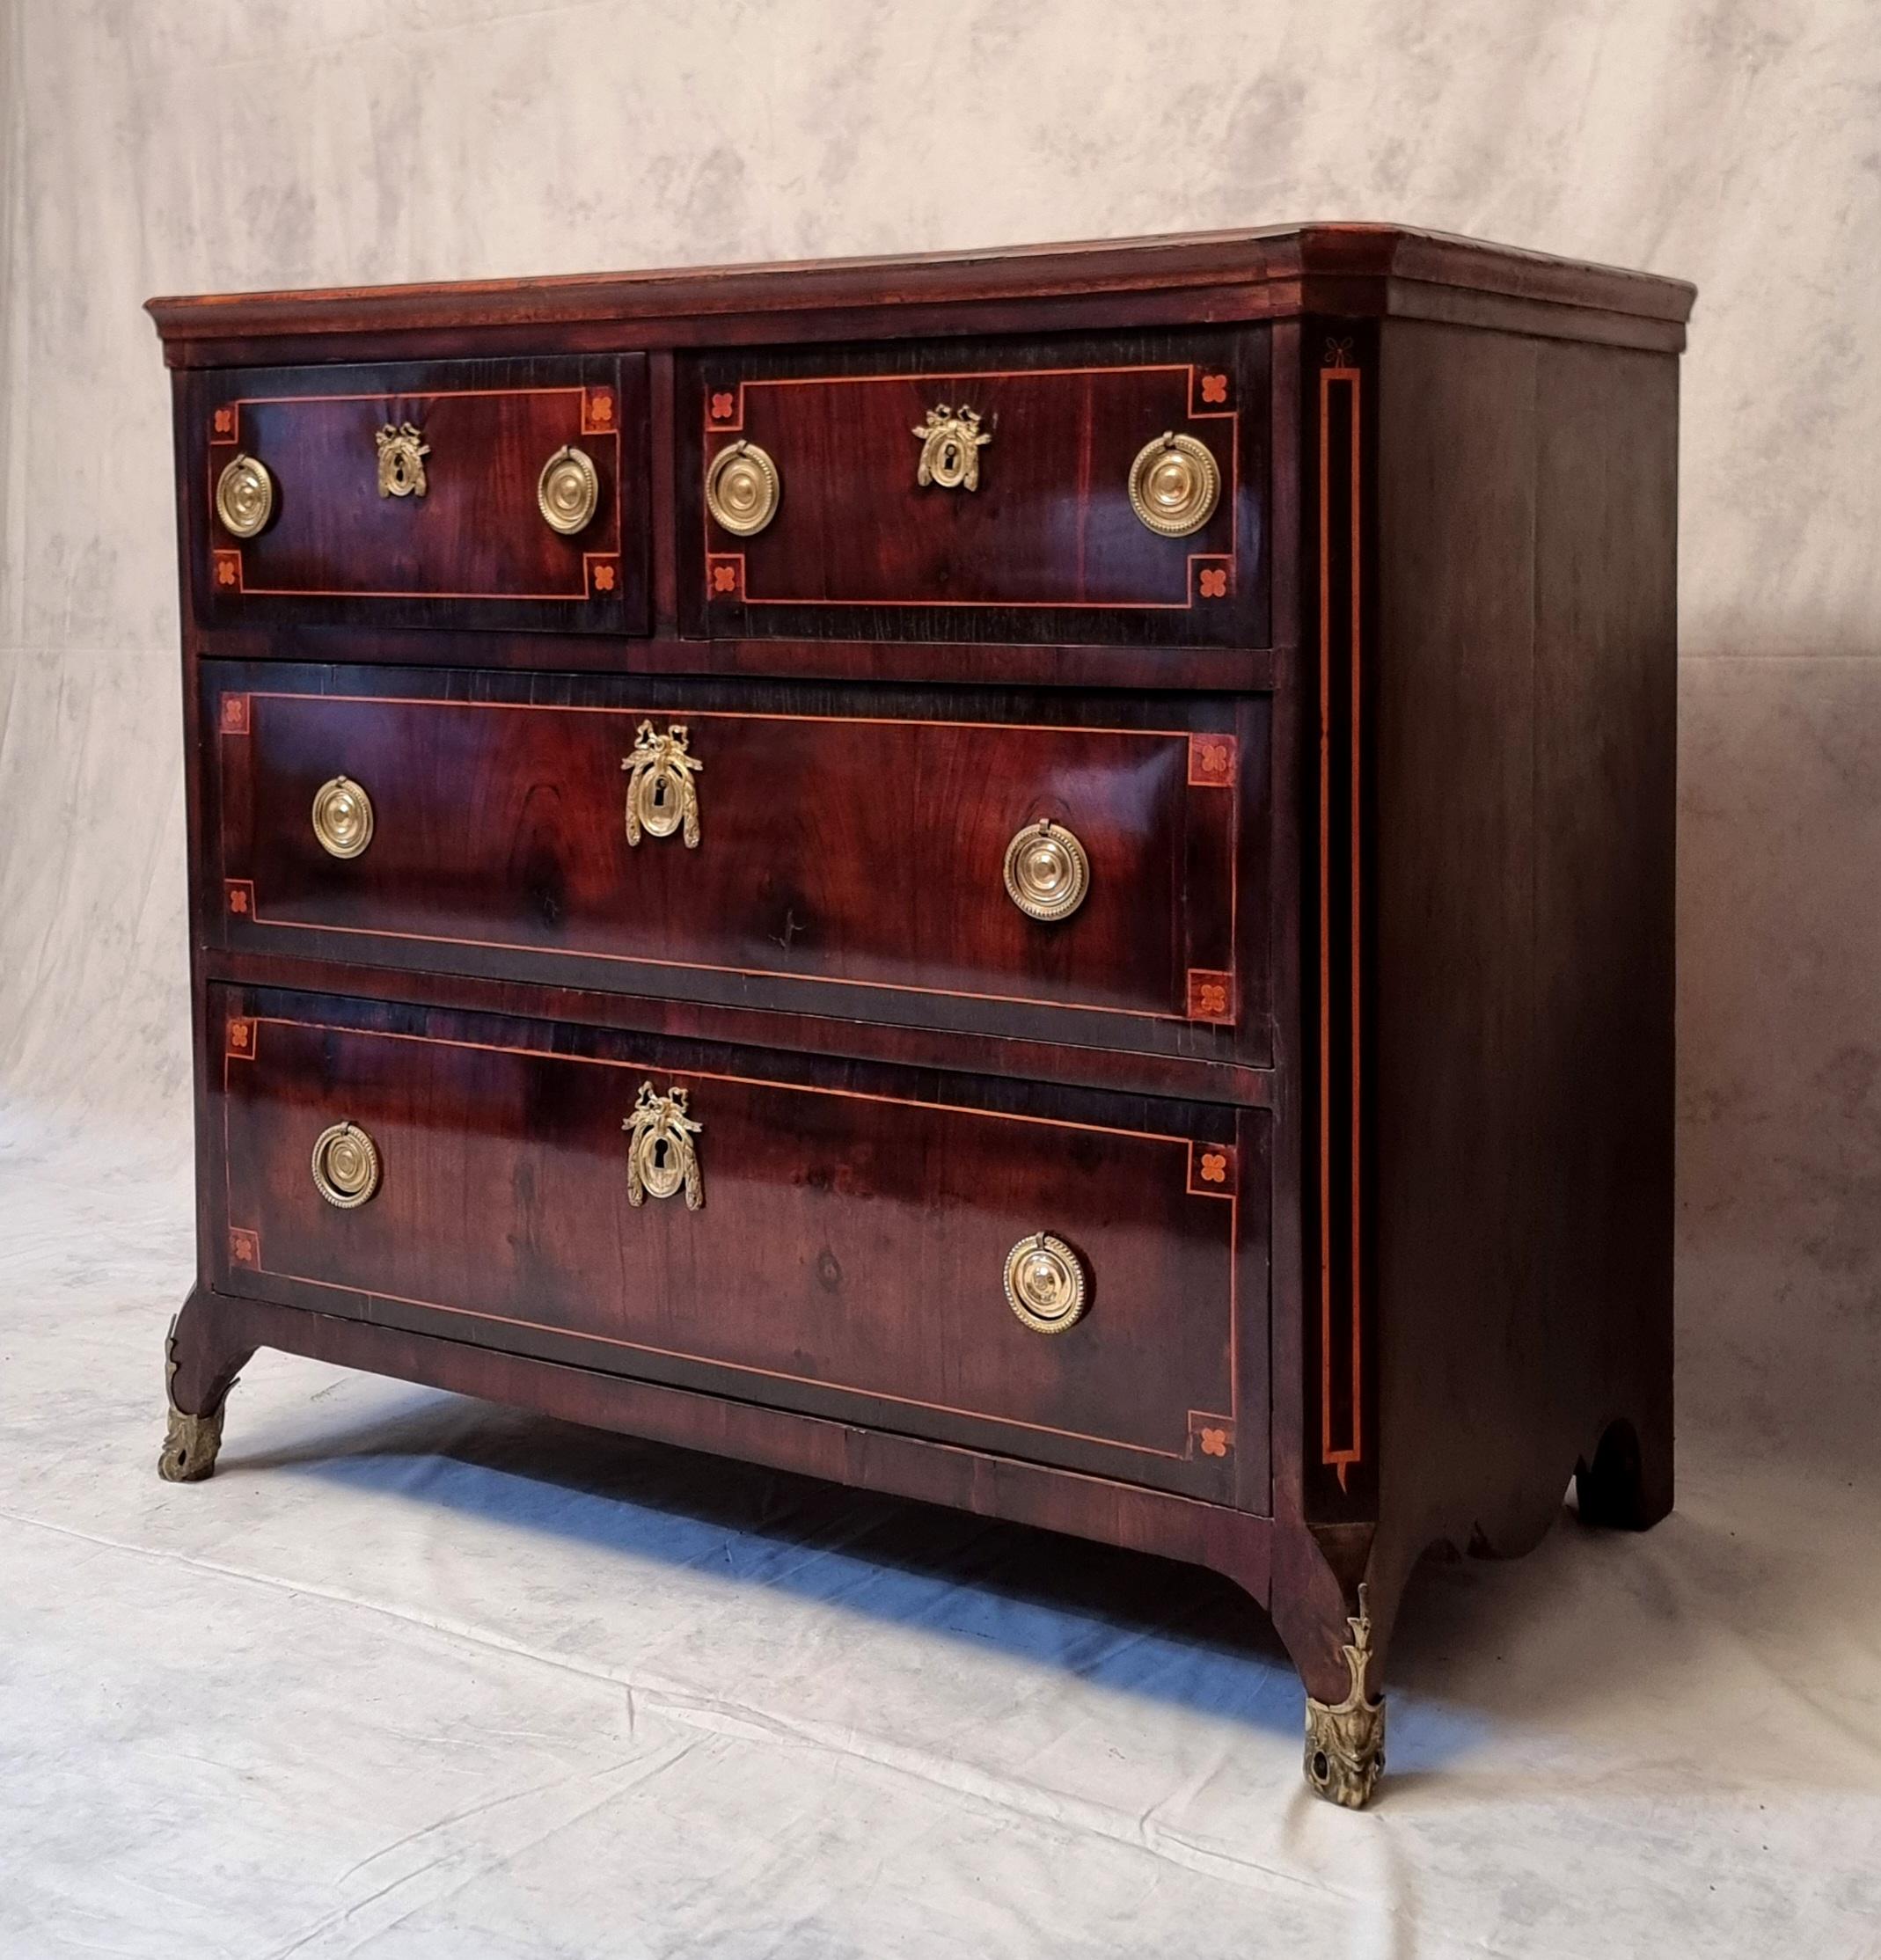 Exceptional Louis XV period chest of drawers in amaranth and violet wood. This high chest of drawers opens with 4 drawers spread over 3 rows. It is inlaid with sycamore fillets and trefoils. The frame of the top is in rosewood. It is elegantly